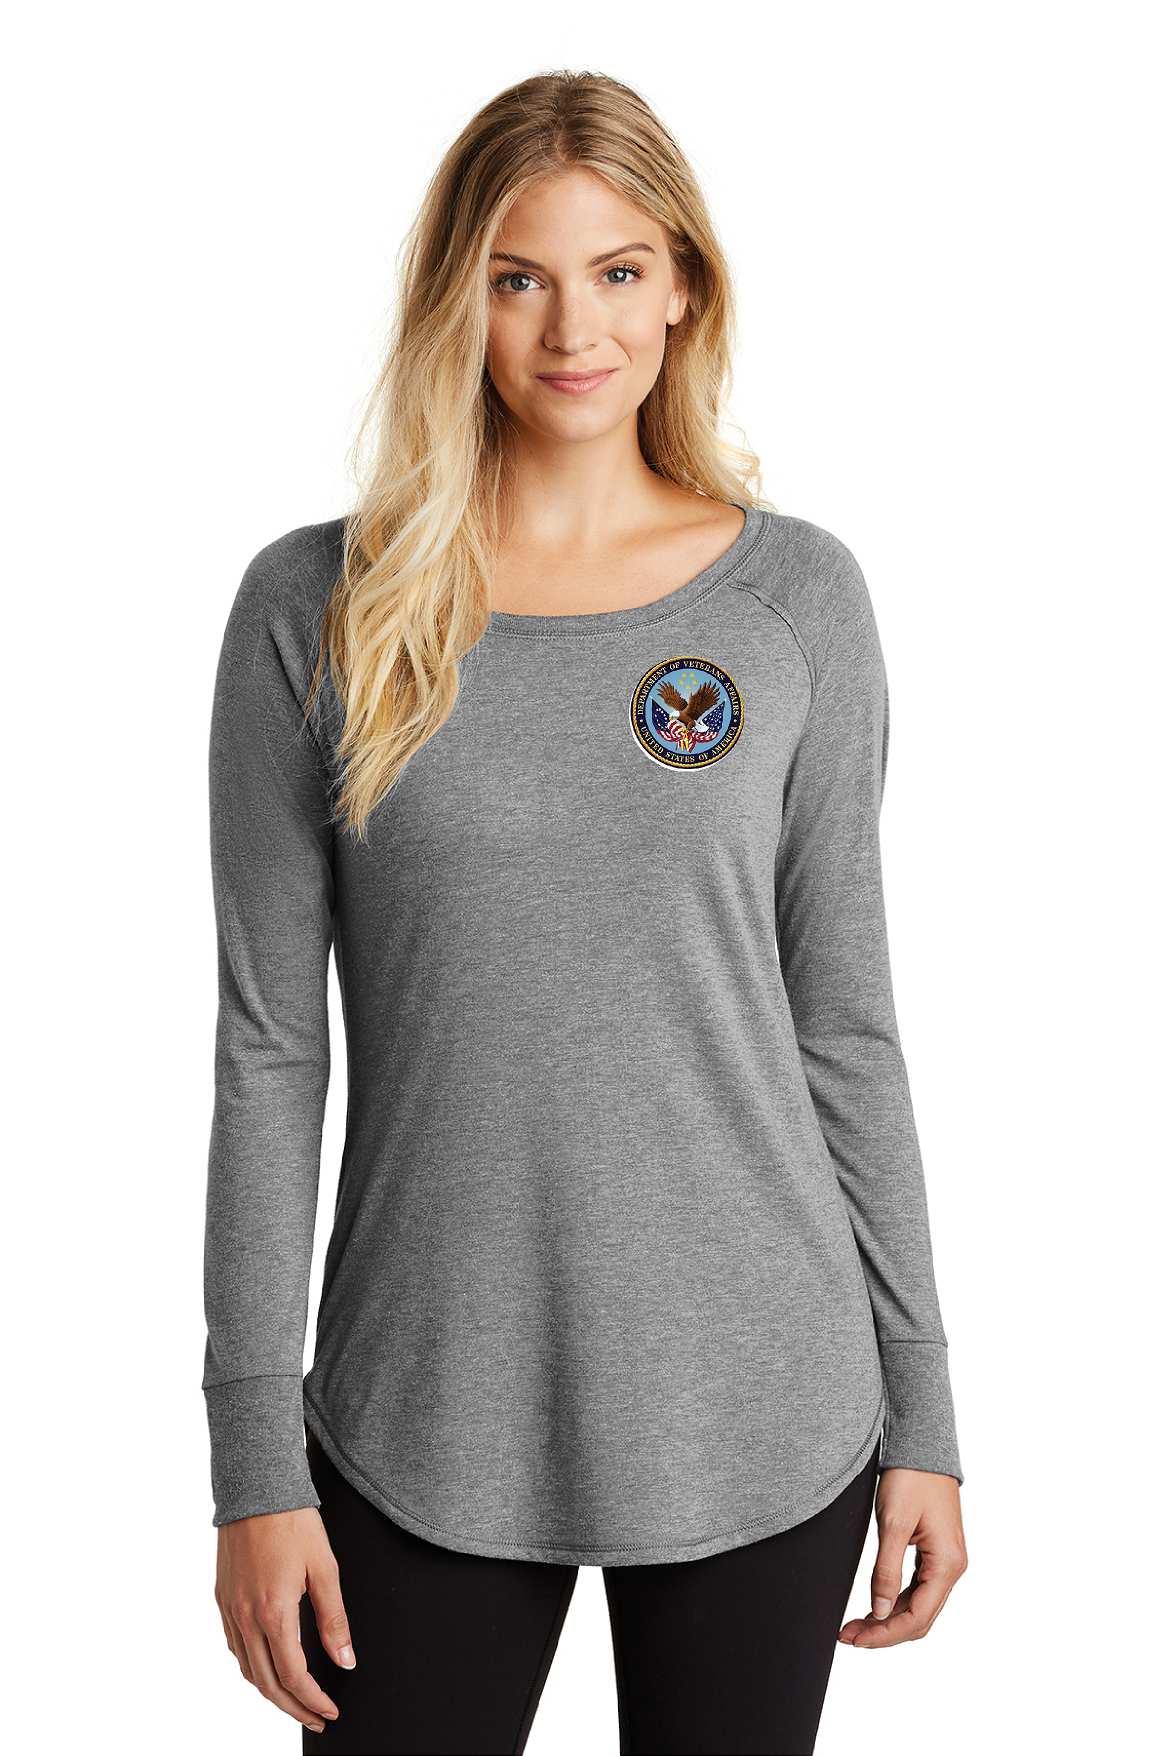 Veterans Affairs Printed Ladies DT132L, District long sleeve tunic